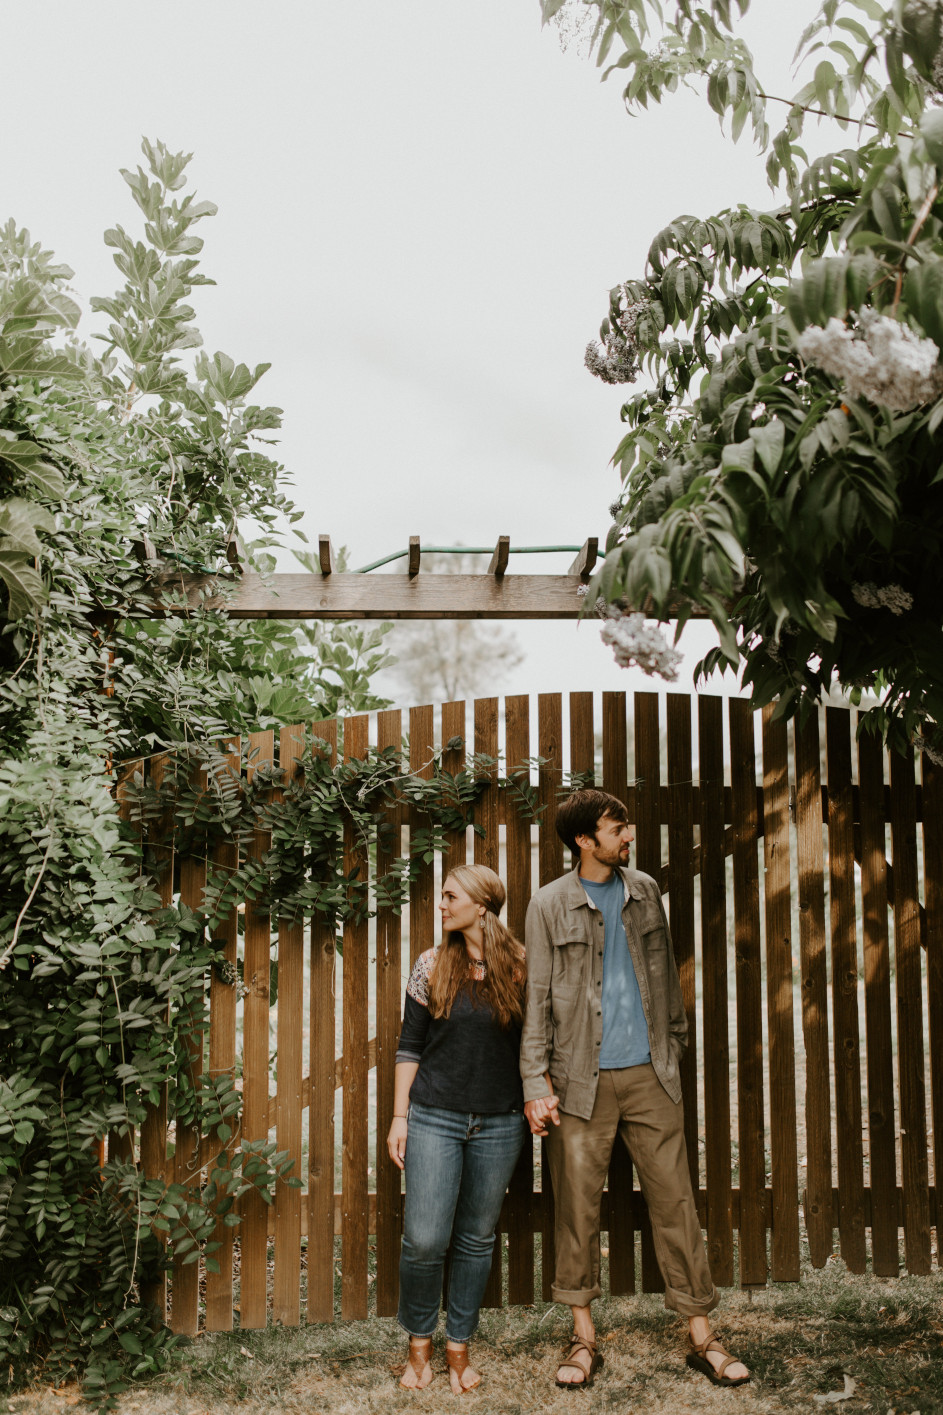 Hannah and Dan stand side by side in Corvallis, Oregon. Intimate wedding photography in Corvallis Oregon by Sienna Plus Josh.